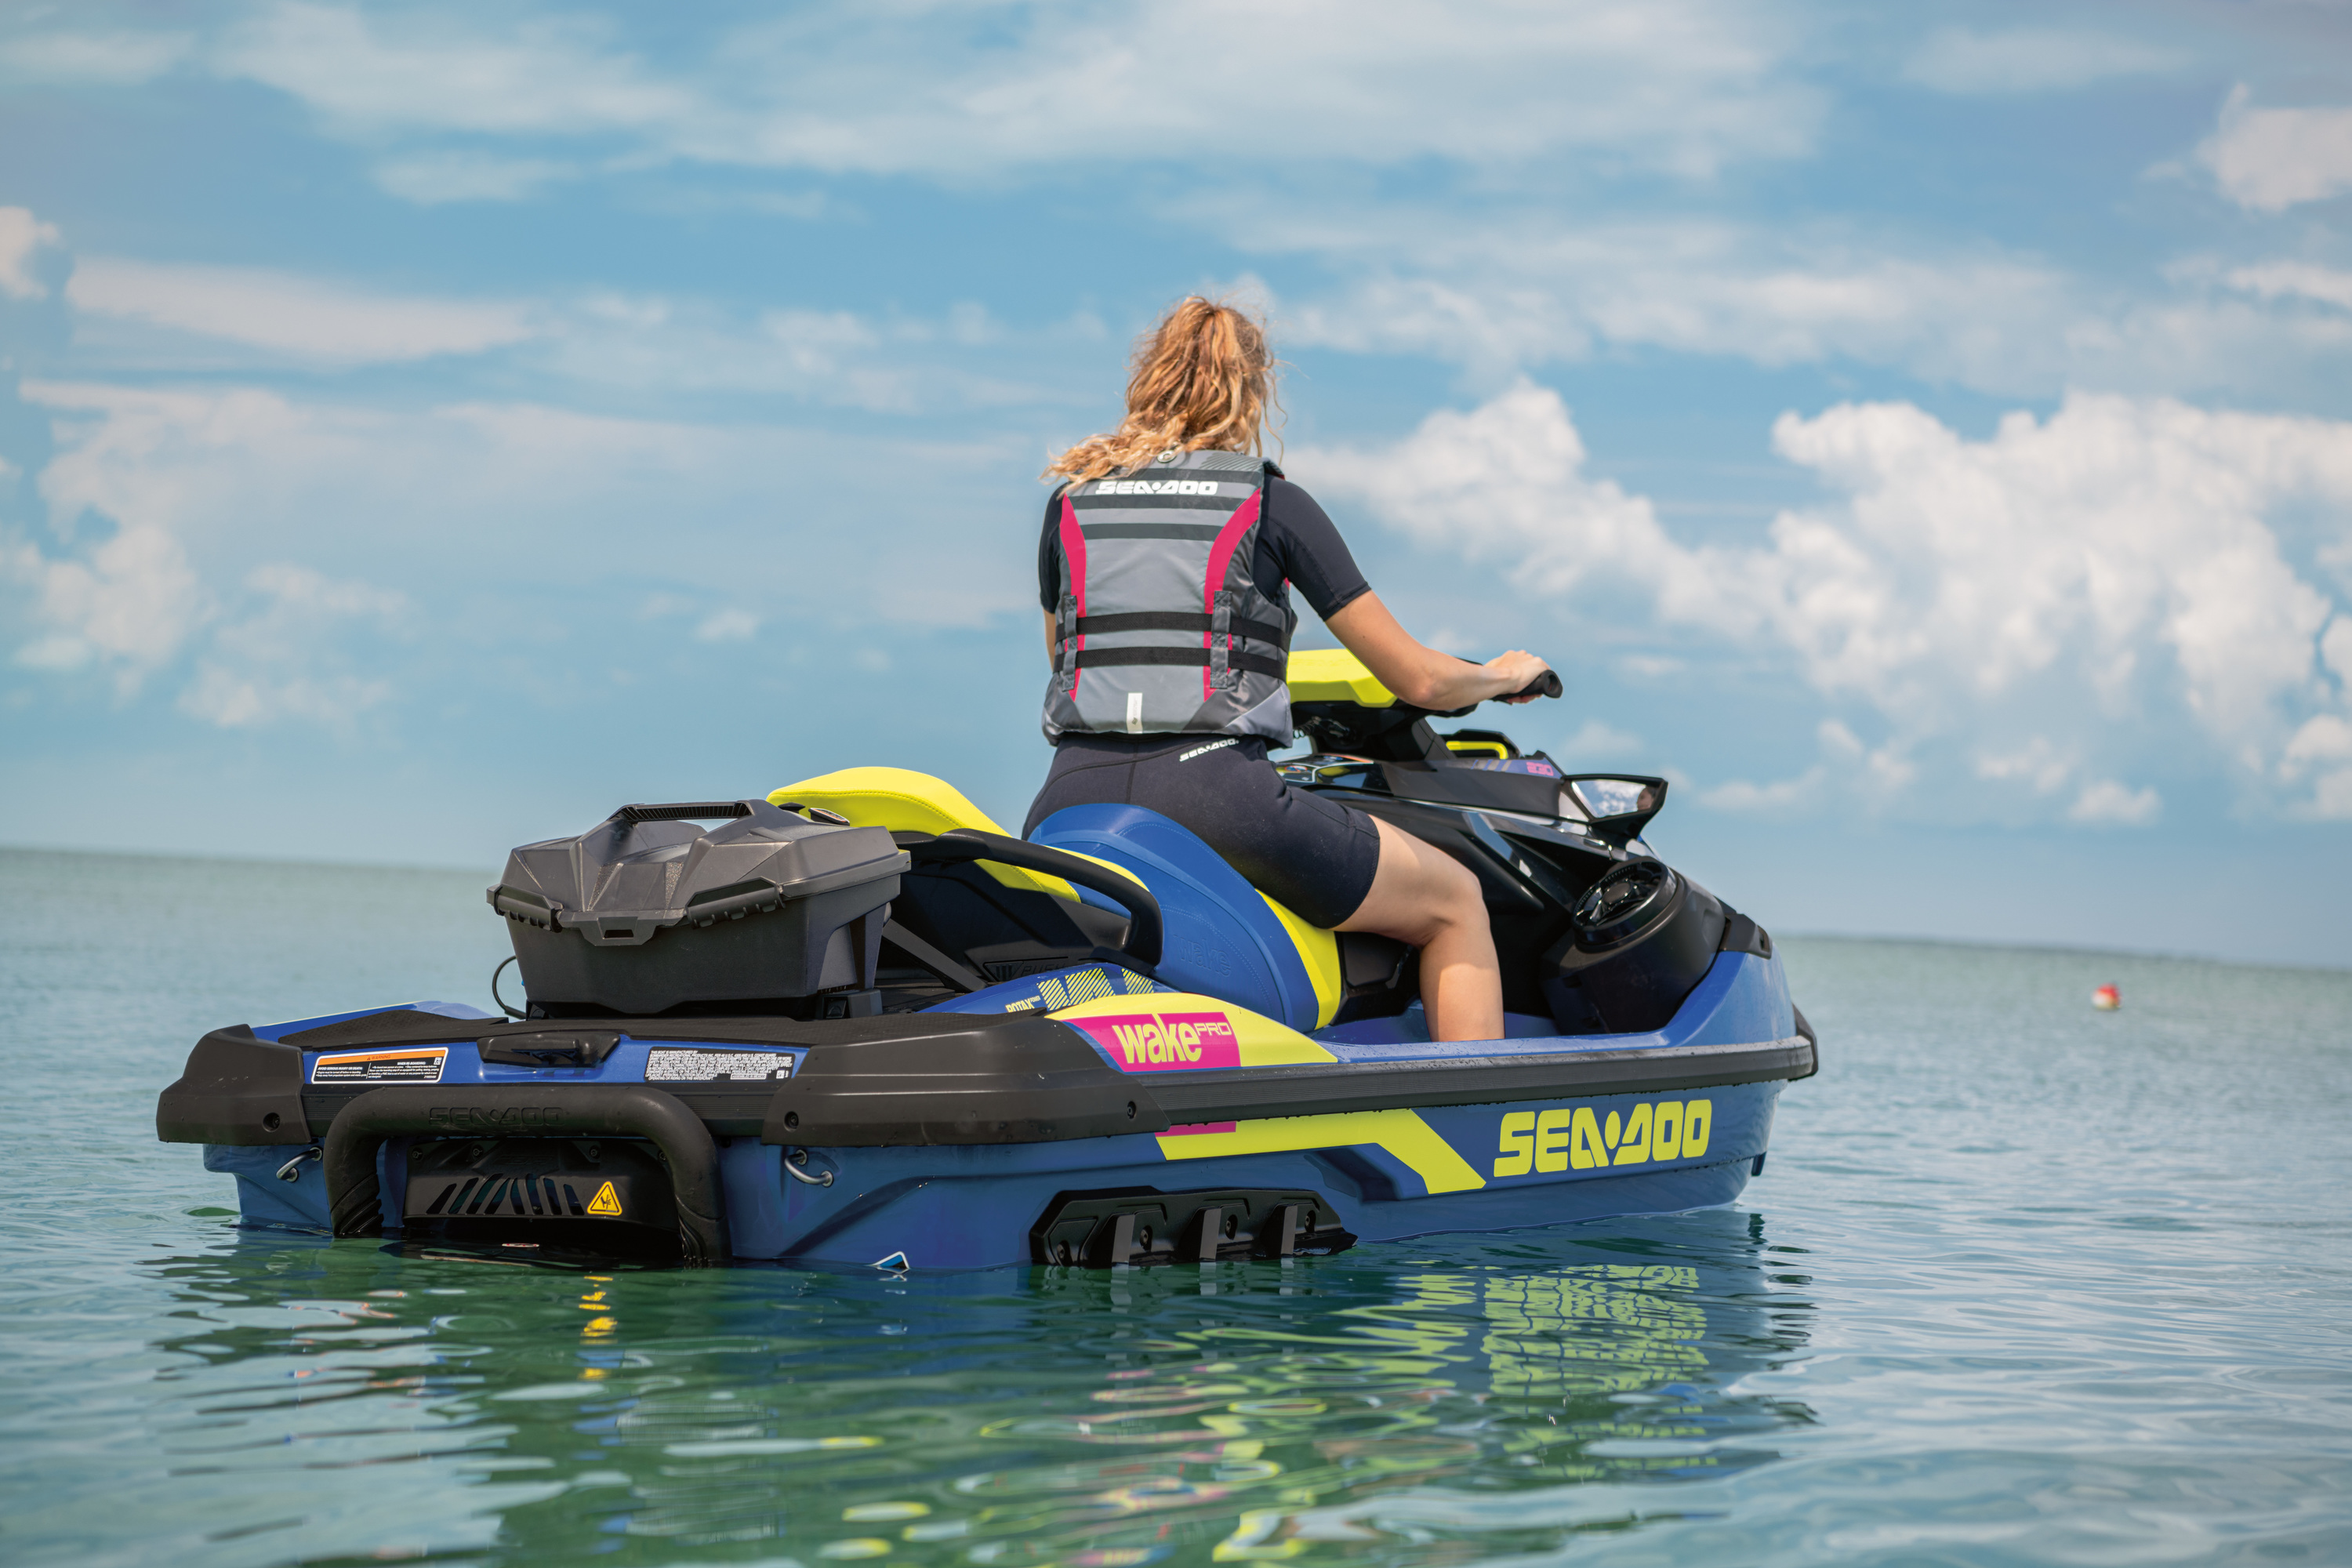 Lady on Sea Doo Wake Pro 230 in blue and yellow with cooler on the back